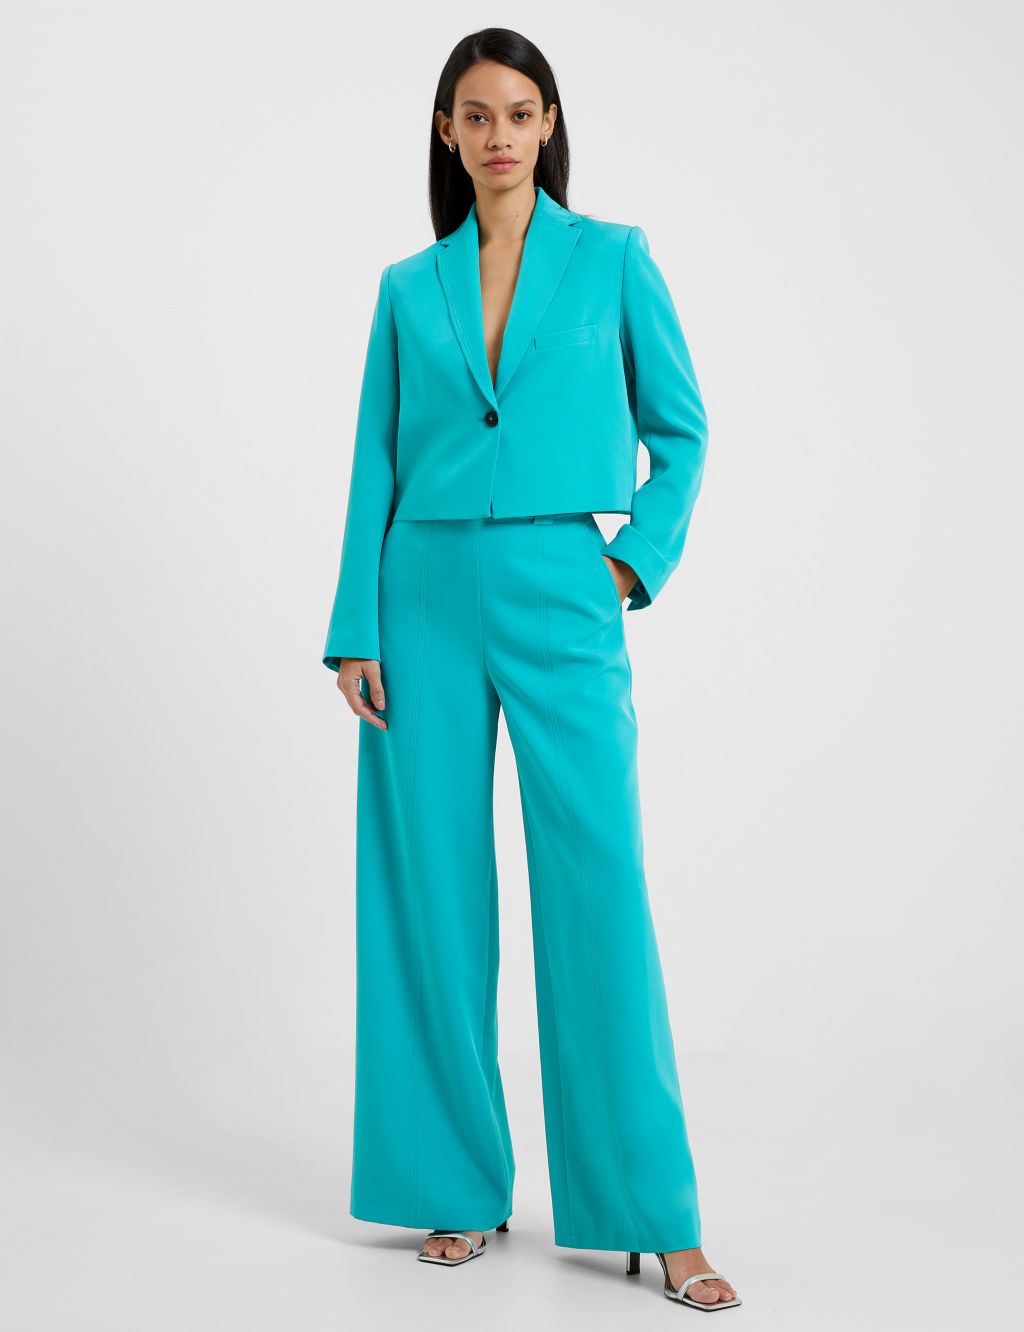 Crepe Tailored Cropped Blazer image 1